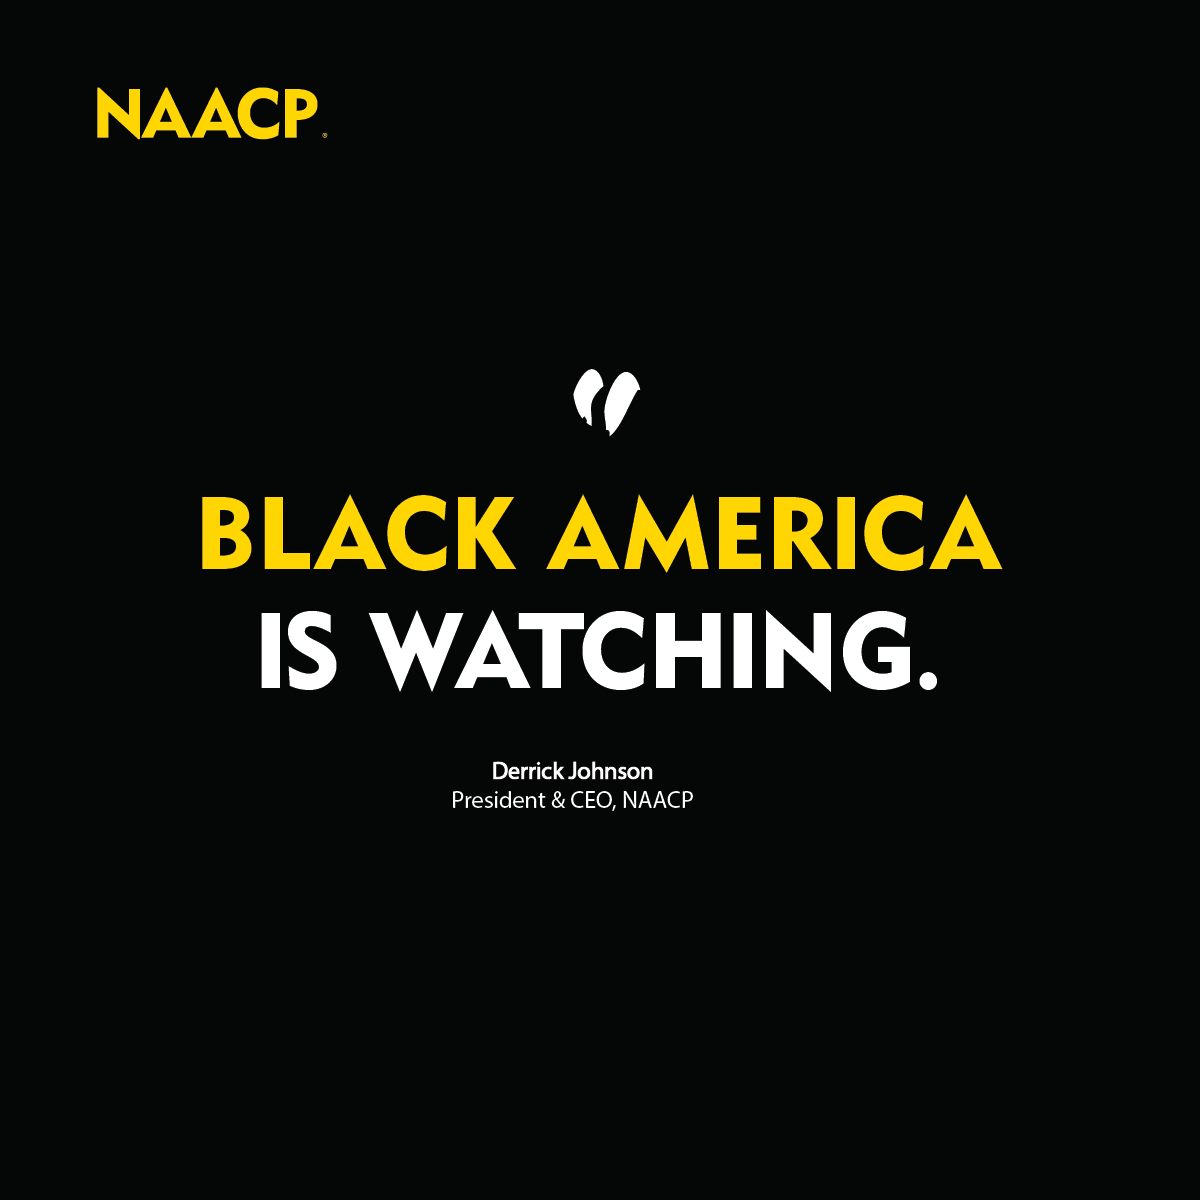 As debt ceiling negotiations continue, it's up to all of just to make sure that Black communities remain a priority in the U.S. Tweet your senators to urge them to act now to prevent the debt ceiling crisis from negatively impacting our communities. 👉🏾 bit.ly/43iTMPS